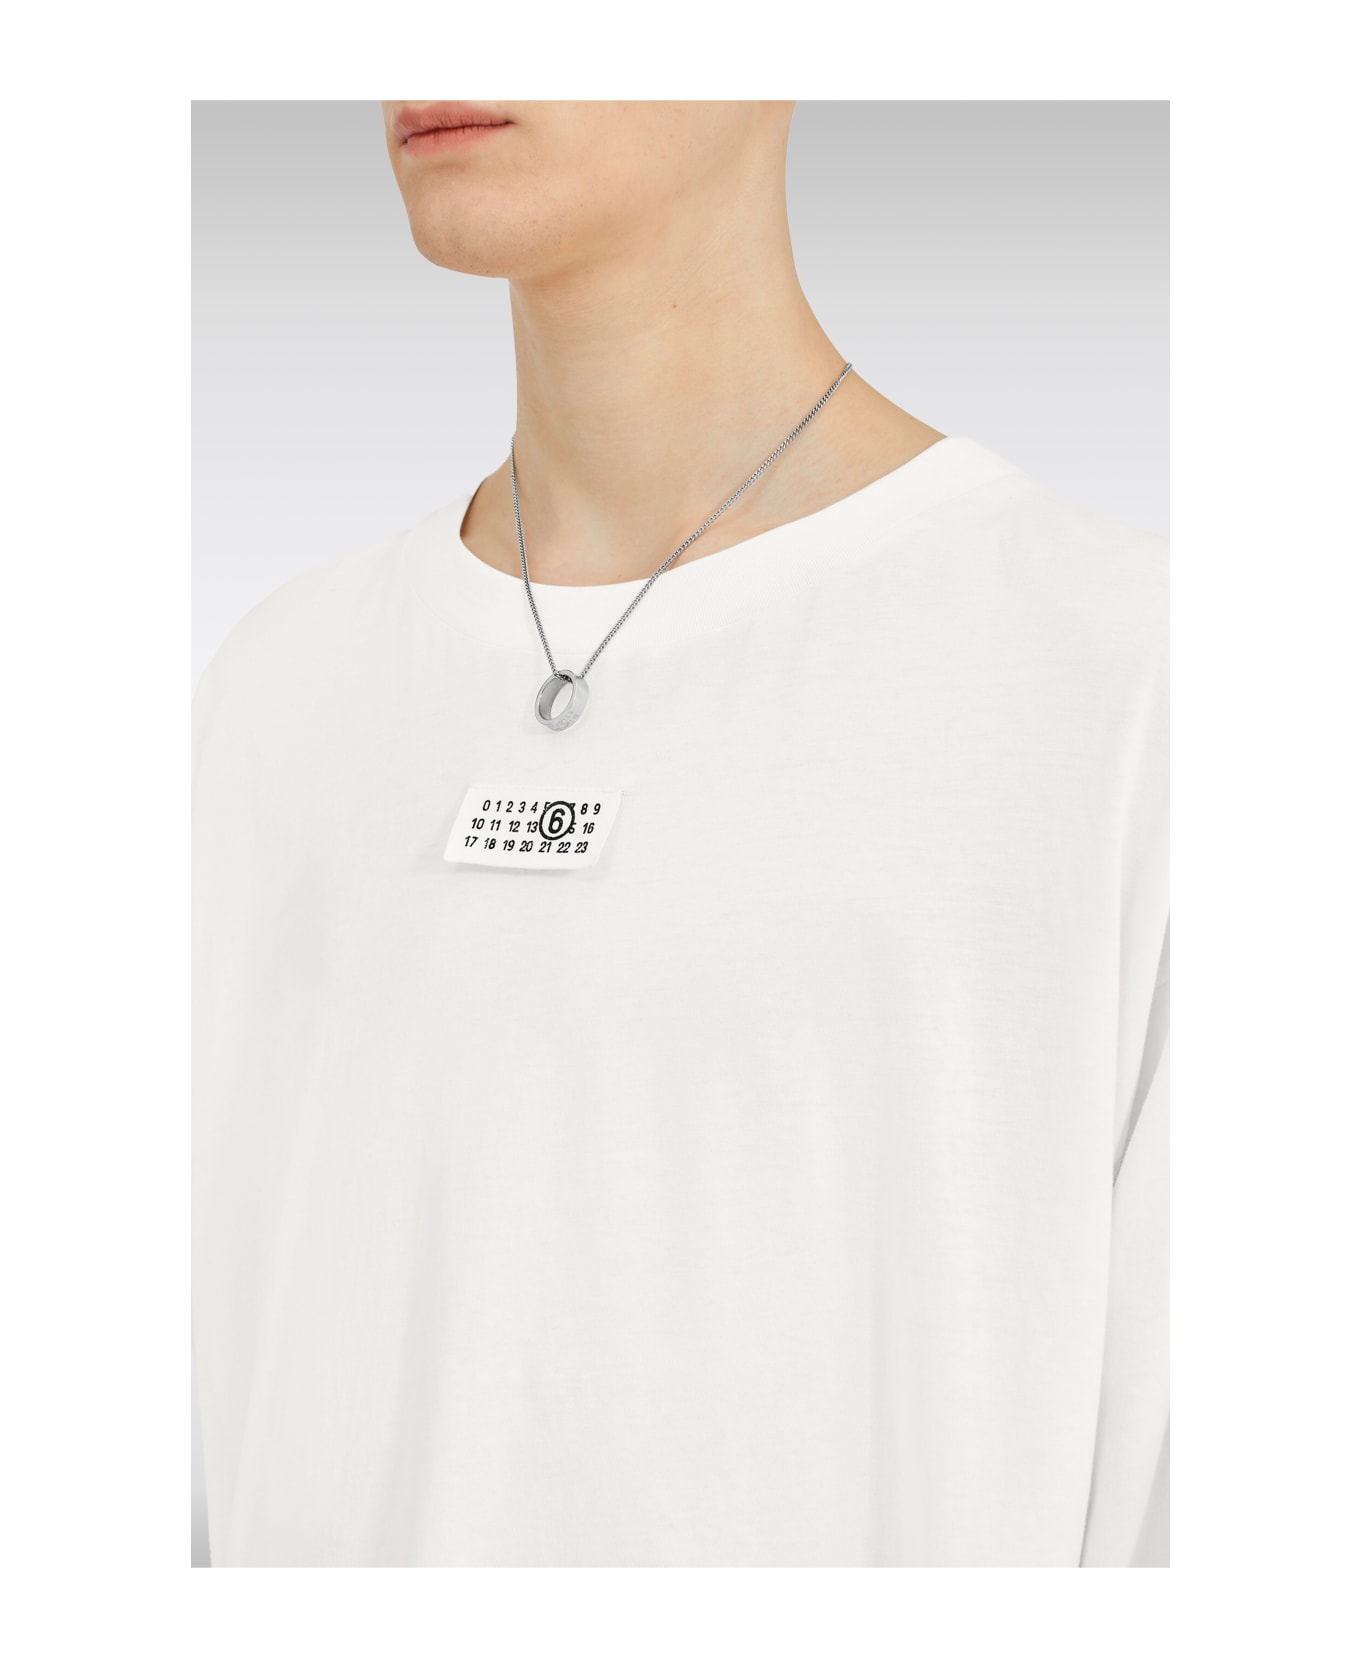 MM6 Maison Margiela T-shirt White cotton t-shirt with long sleeves and front logo tag - Bianco